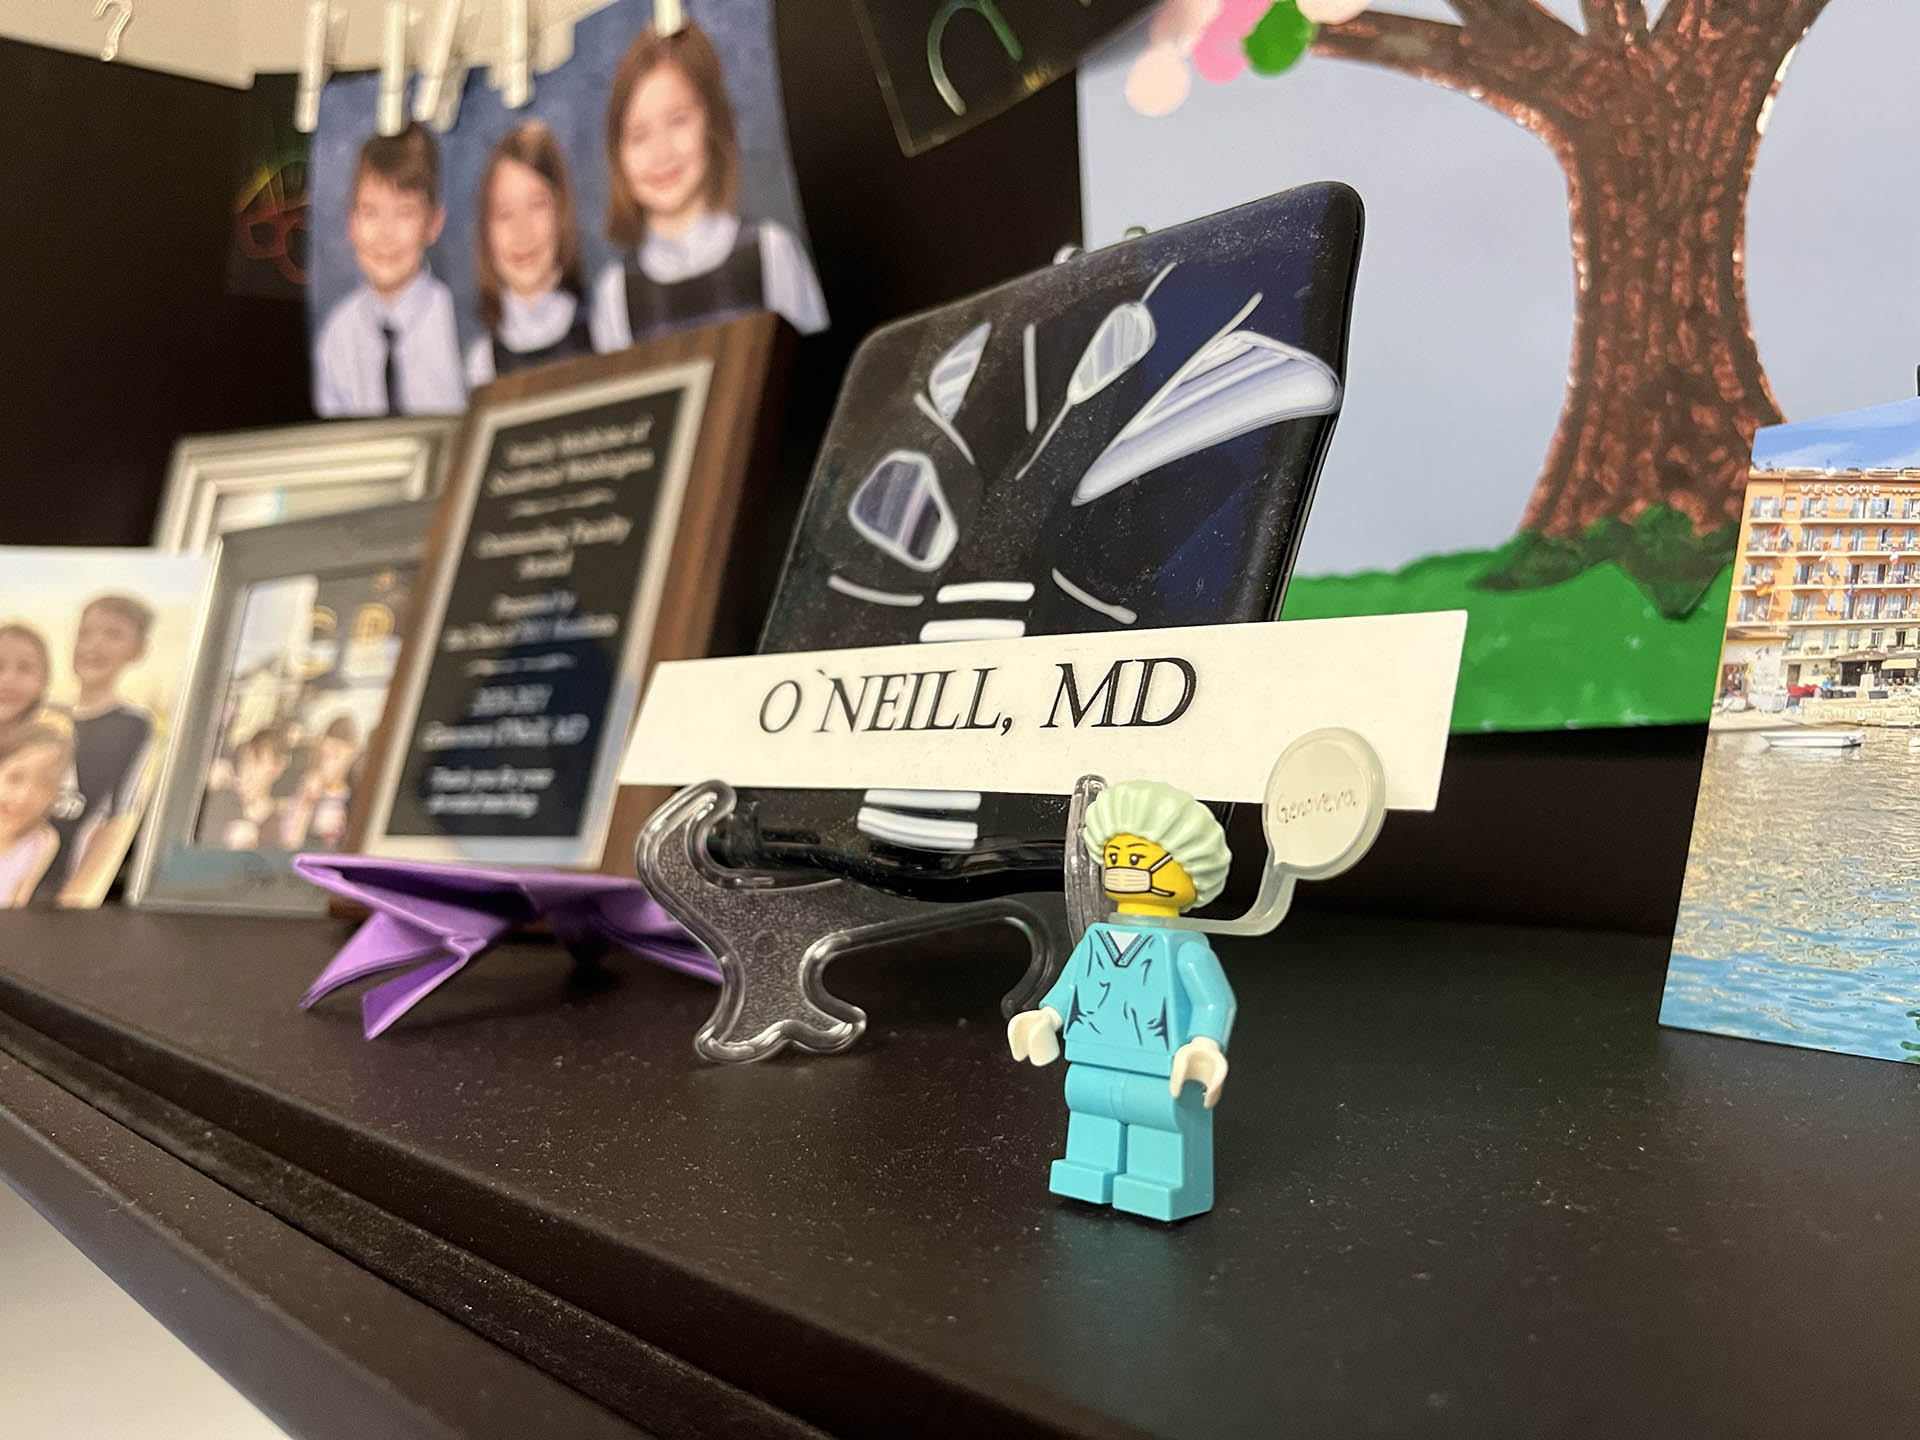 A Lego minifigure of a female medical doctor sits on a desk, with family photos of children in the background.